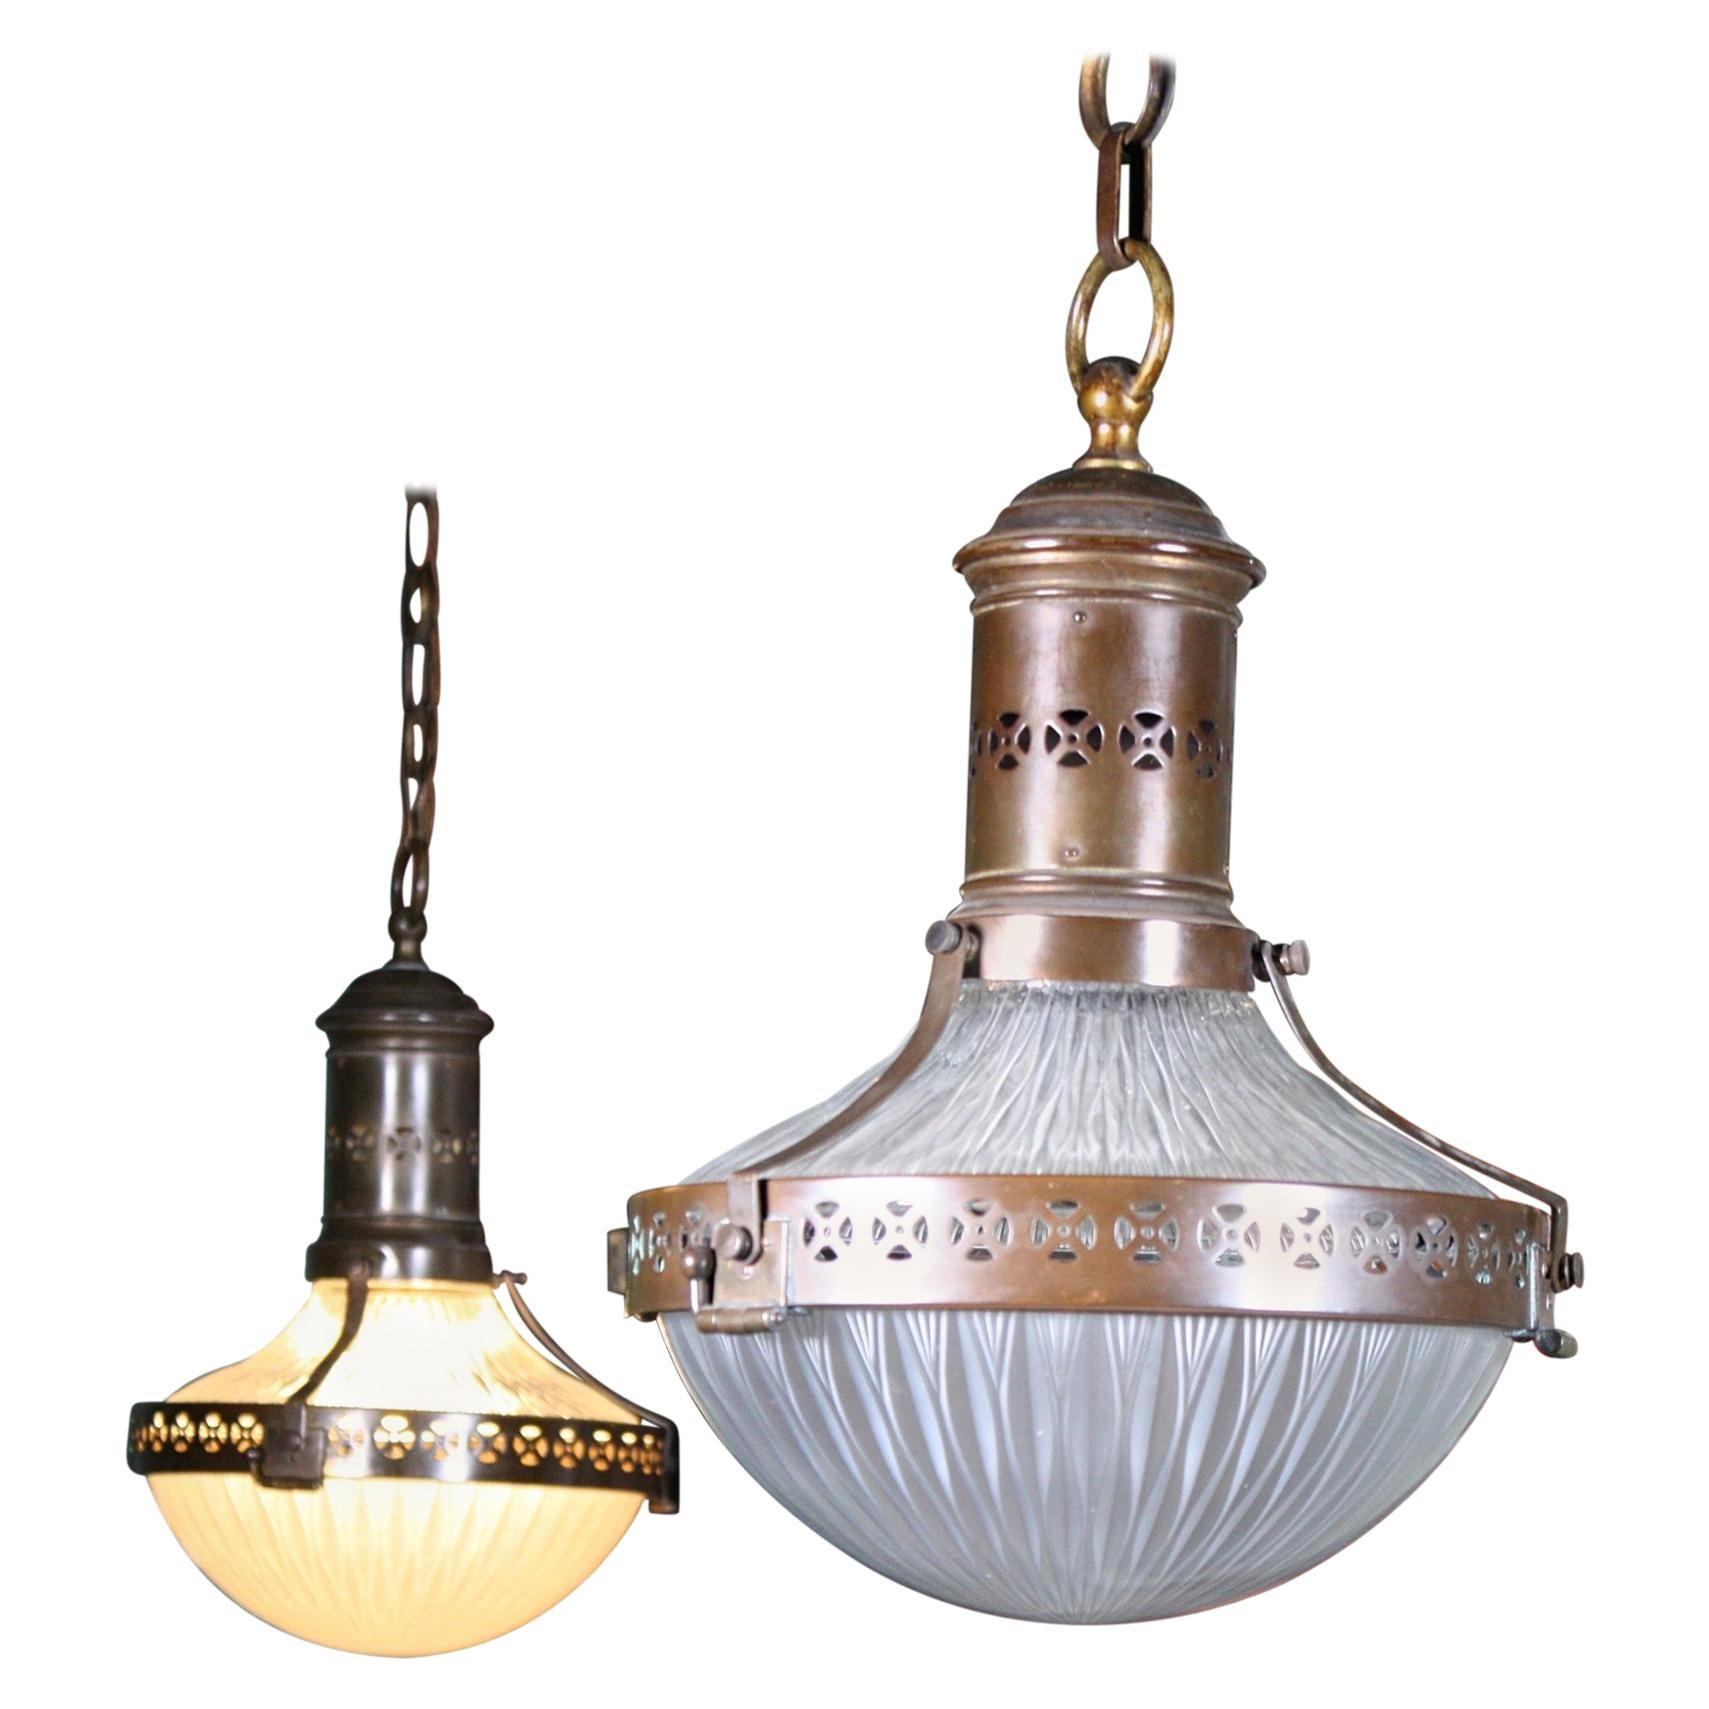 Pair of Prismatic Glass and Brass Asteroid Pendants Lights Lanterns